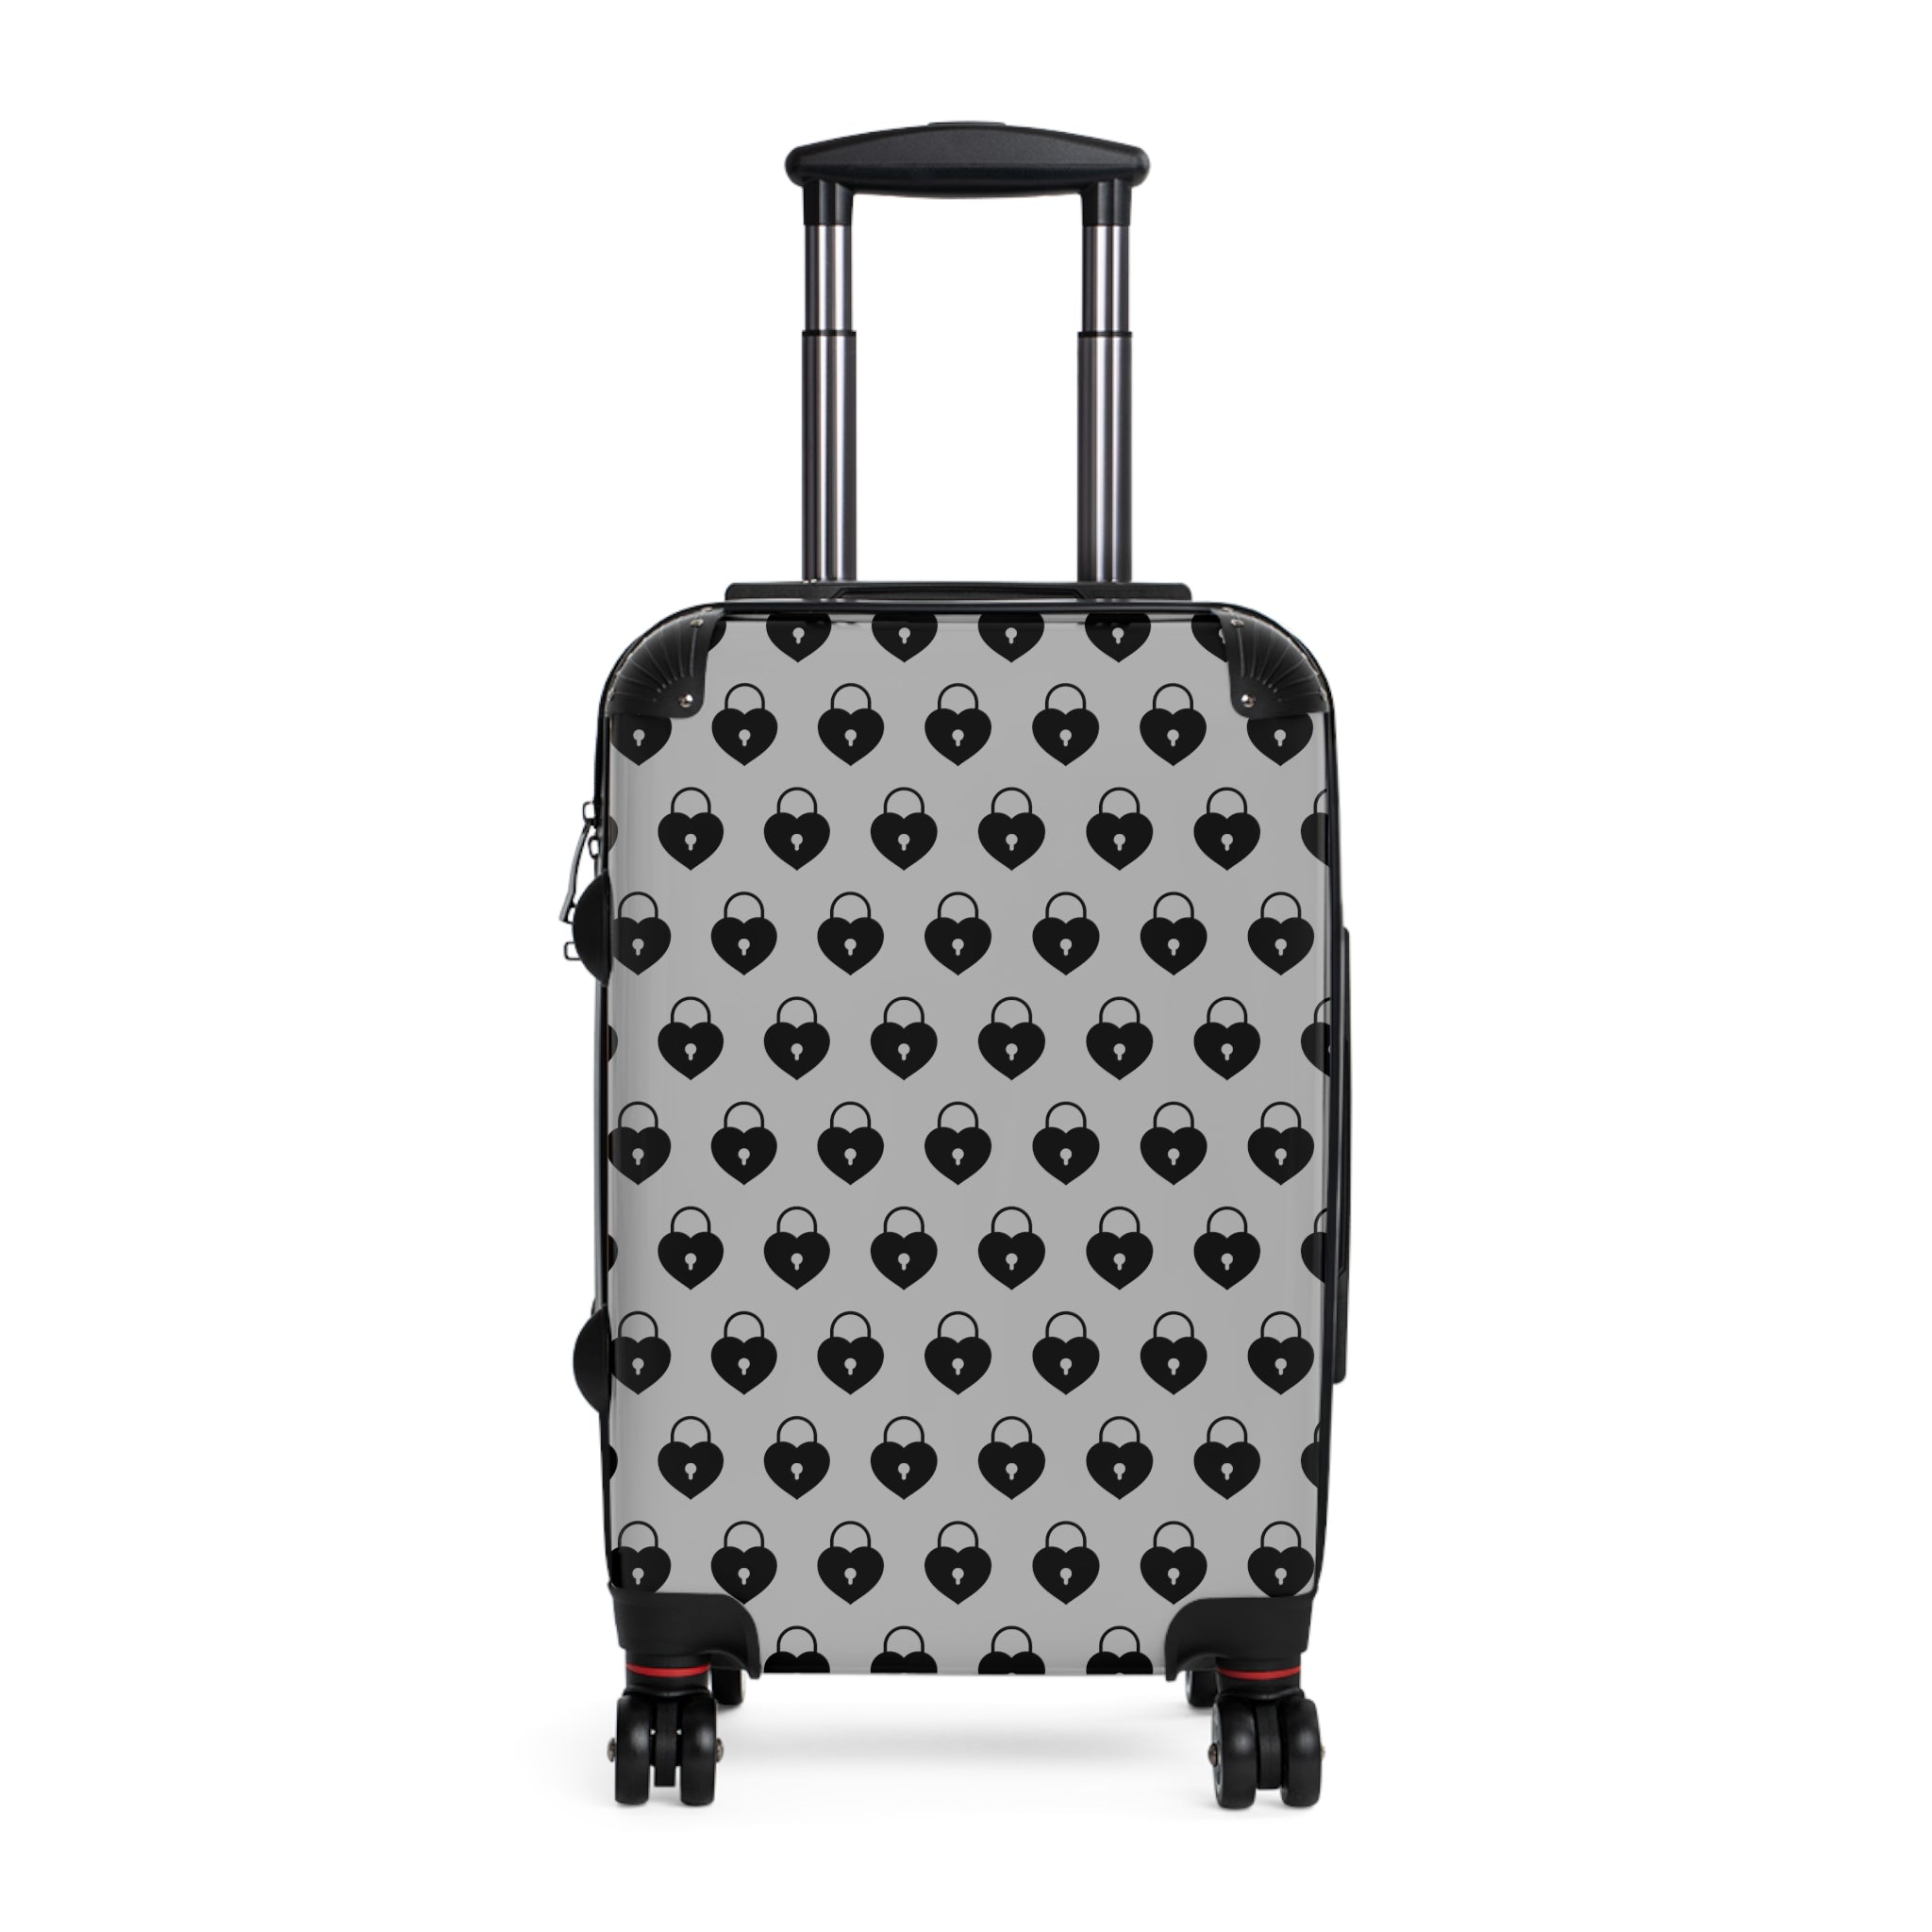 Abby Travel Collection Terrific and Co. (Lock Pattern) Grey Suitcase, Hard Shell Luggage, Rolling Suitcase for Travel, Carry On Bag Bags Small-Black The Middle Aged Groove